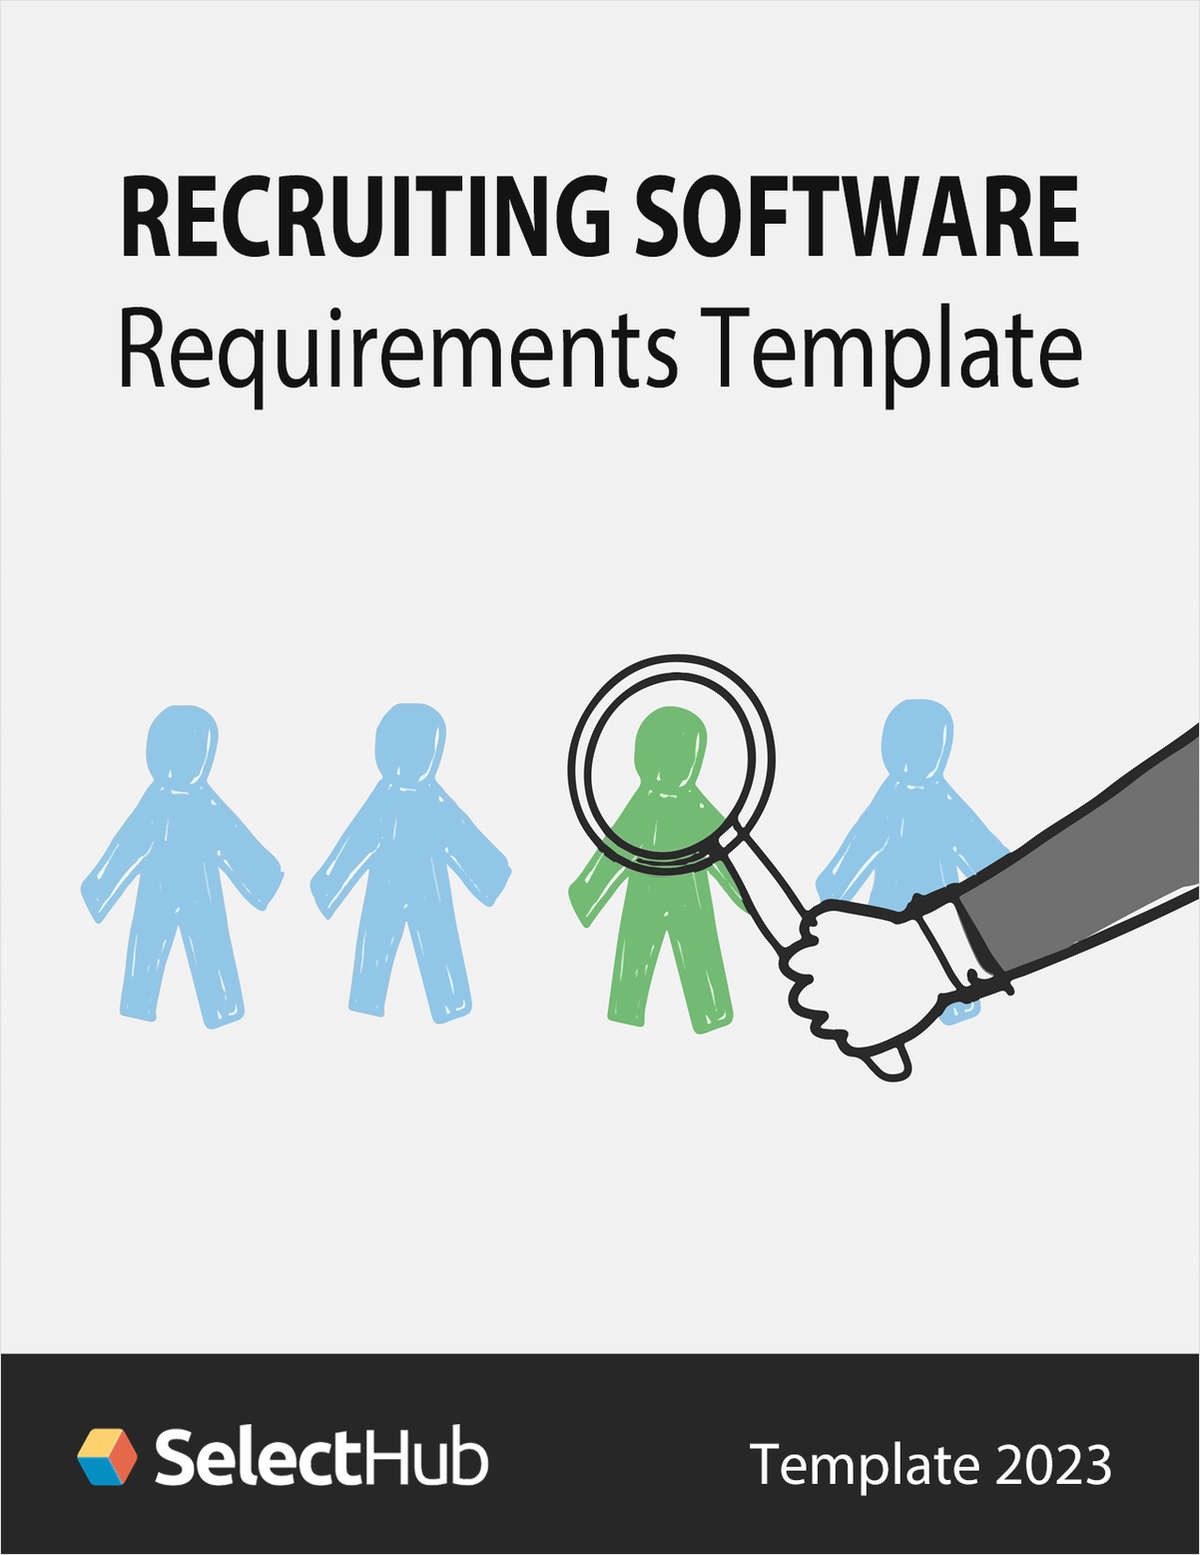 Recruiting Software Requirements Checklist & Template